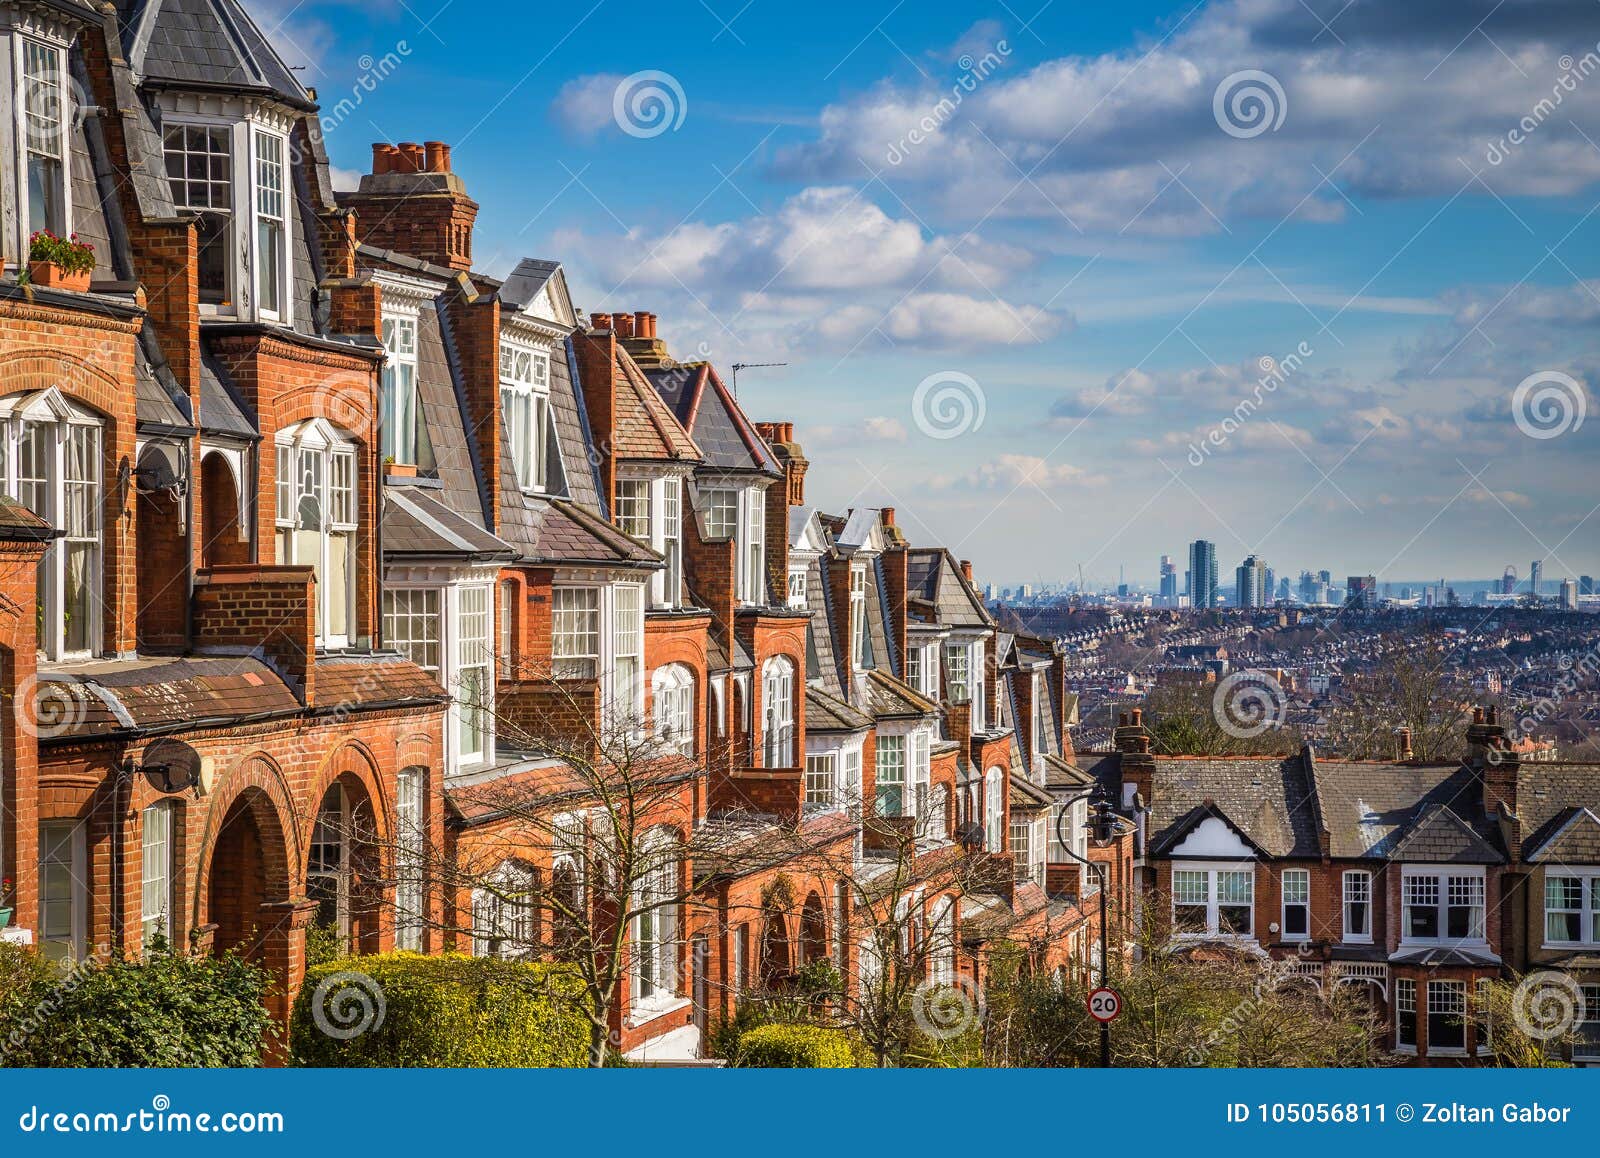 London England Typical Brick Houses And Flats And Panoramic